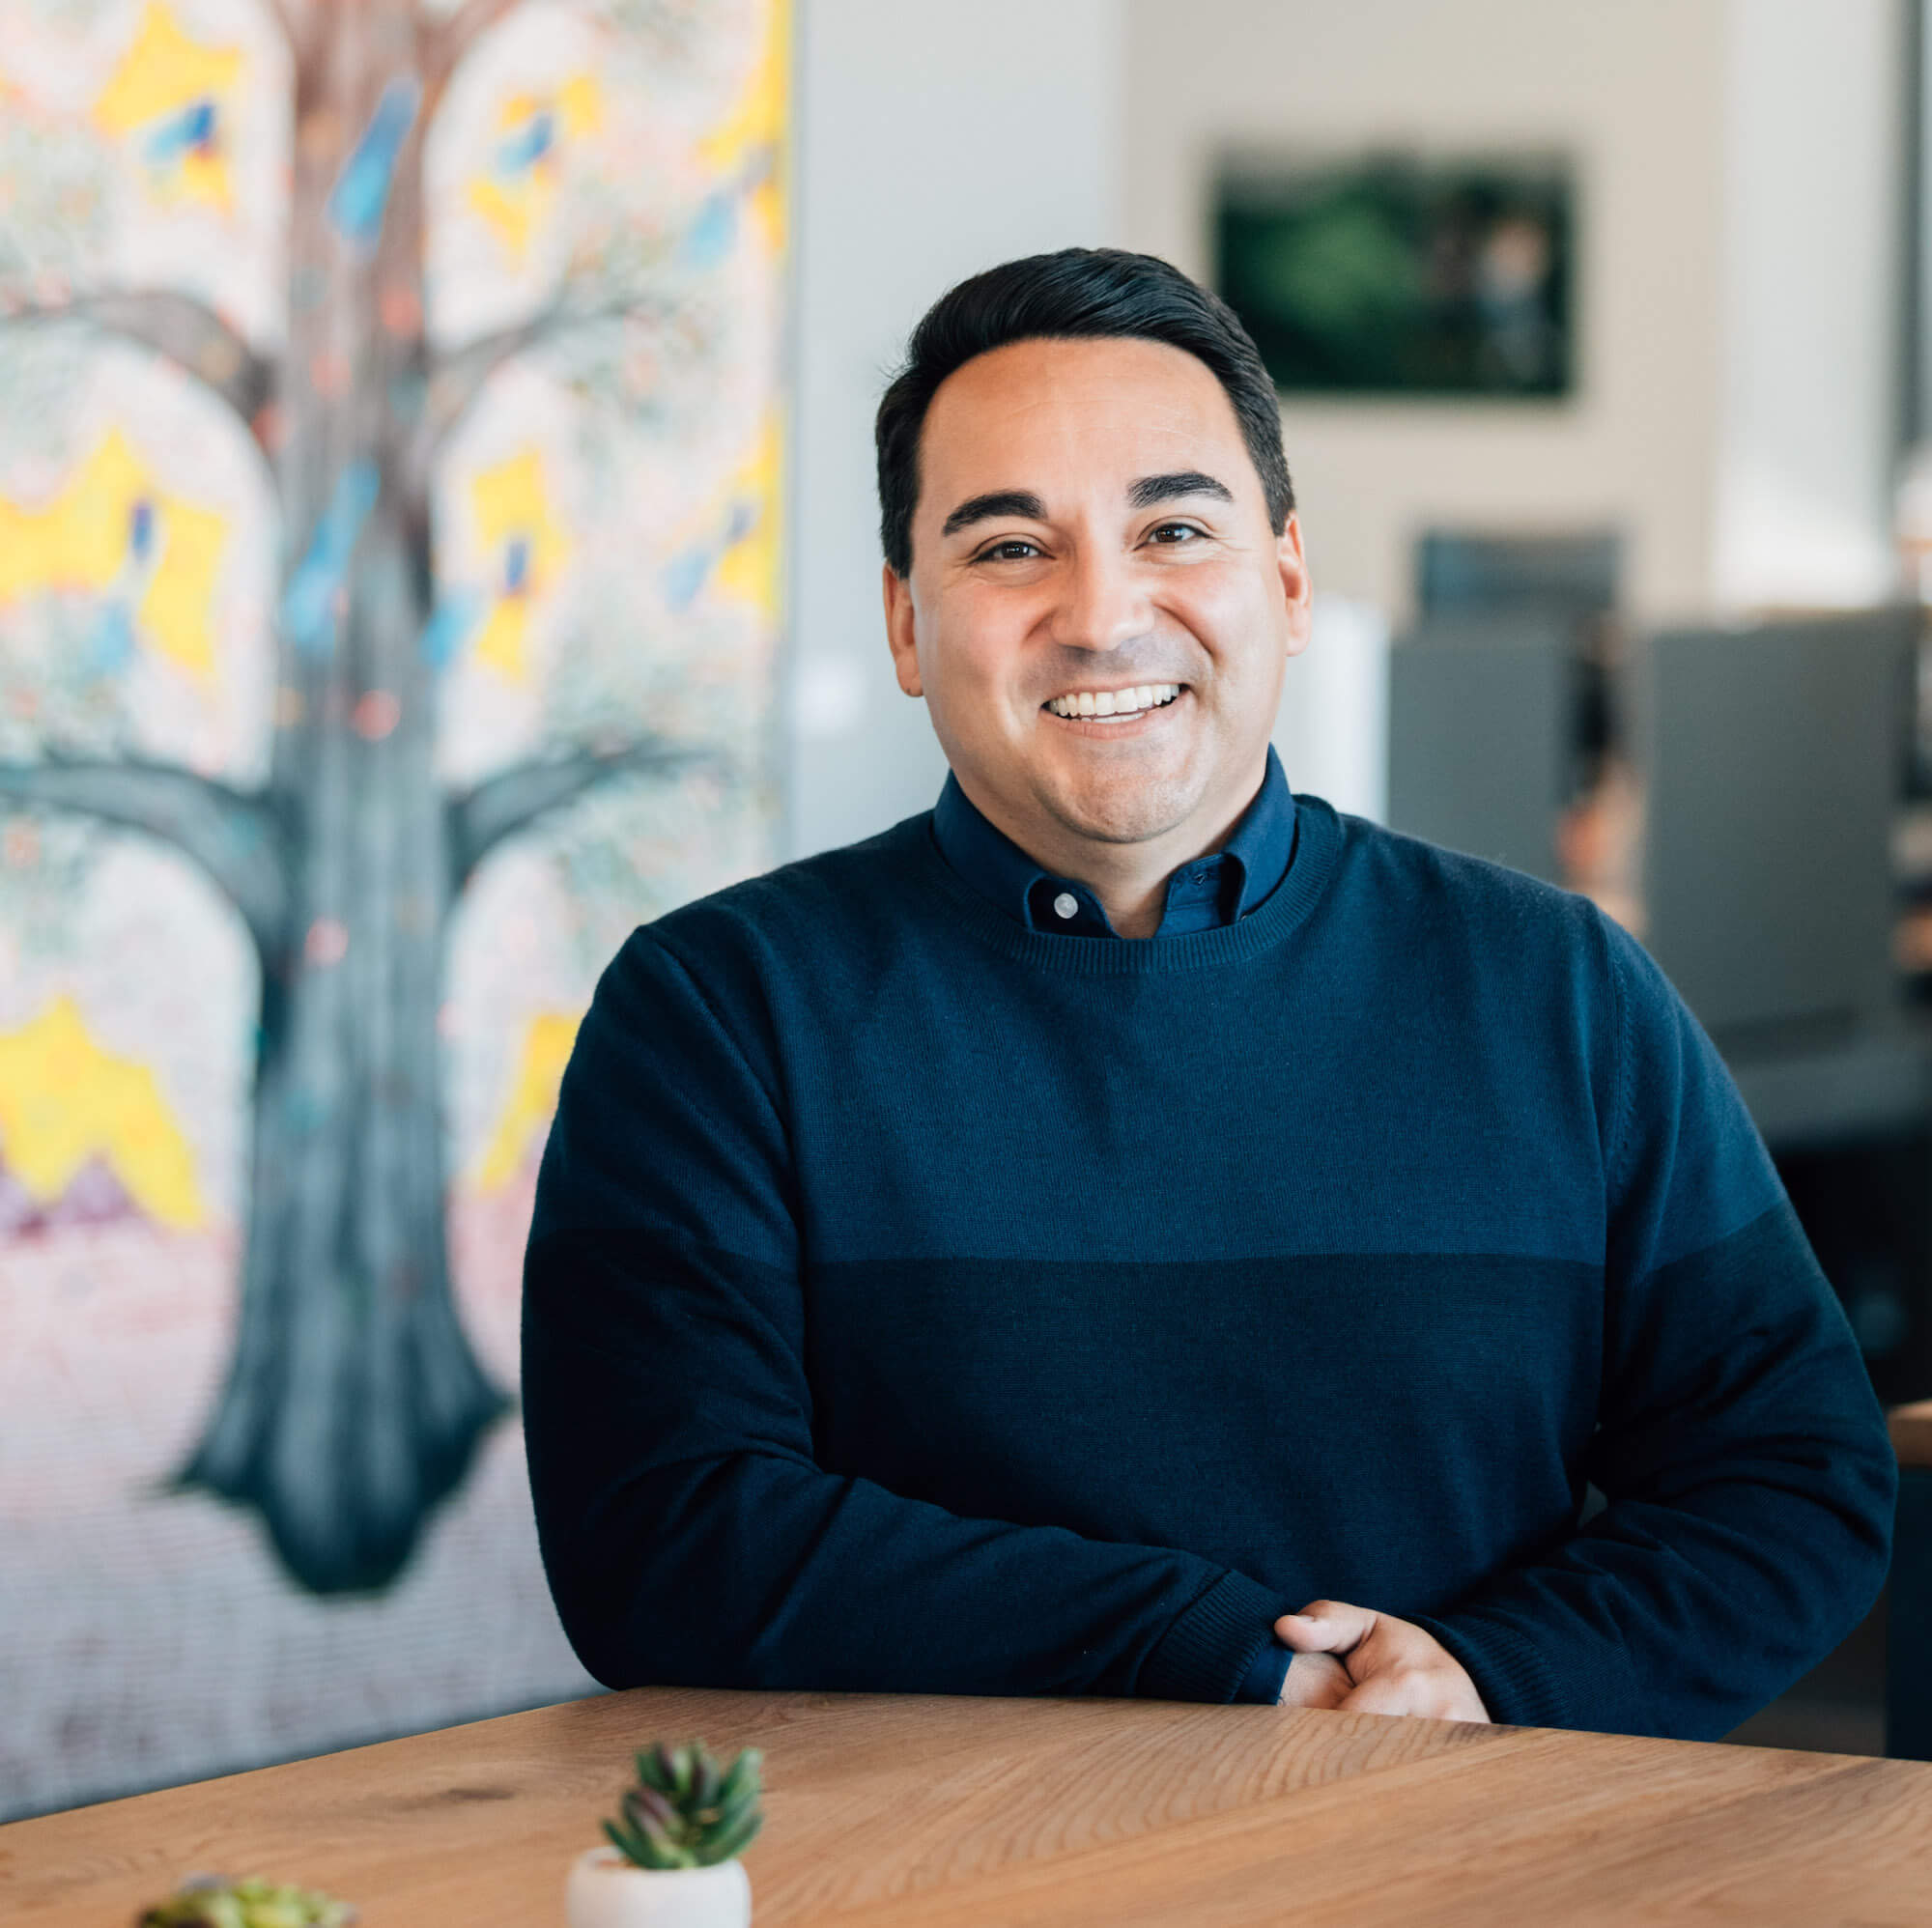 A portrait of Mike Troncoso, the Vice President and Head of the Justice & Opportunity Initiative at the Chan Zuckerberg Initiative